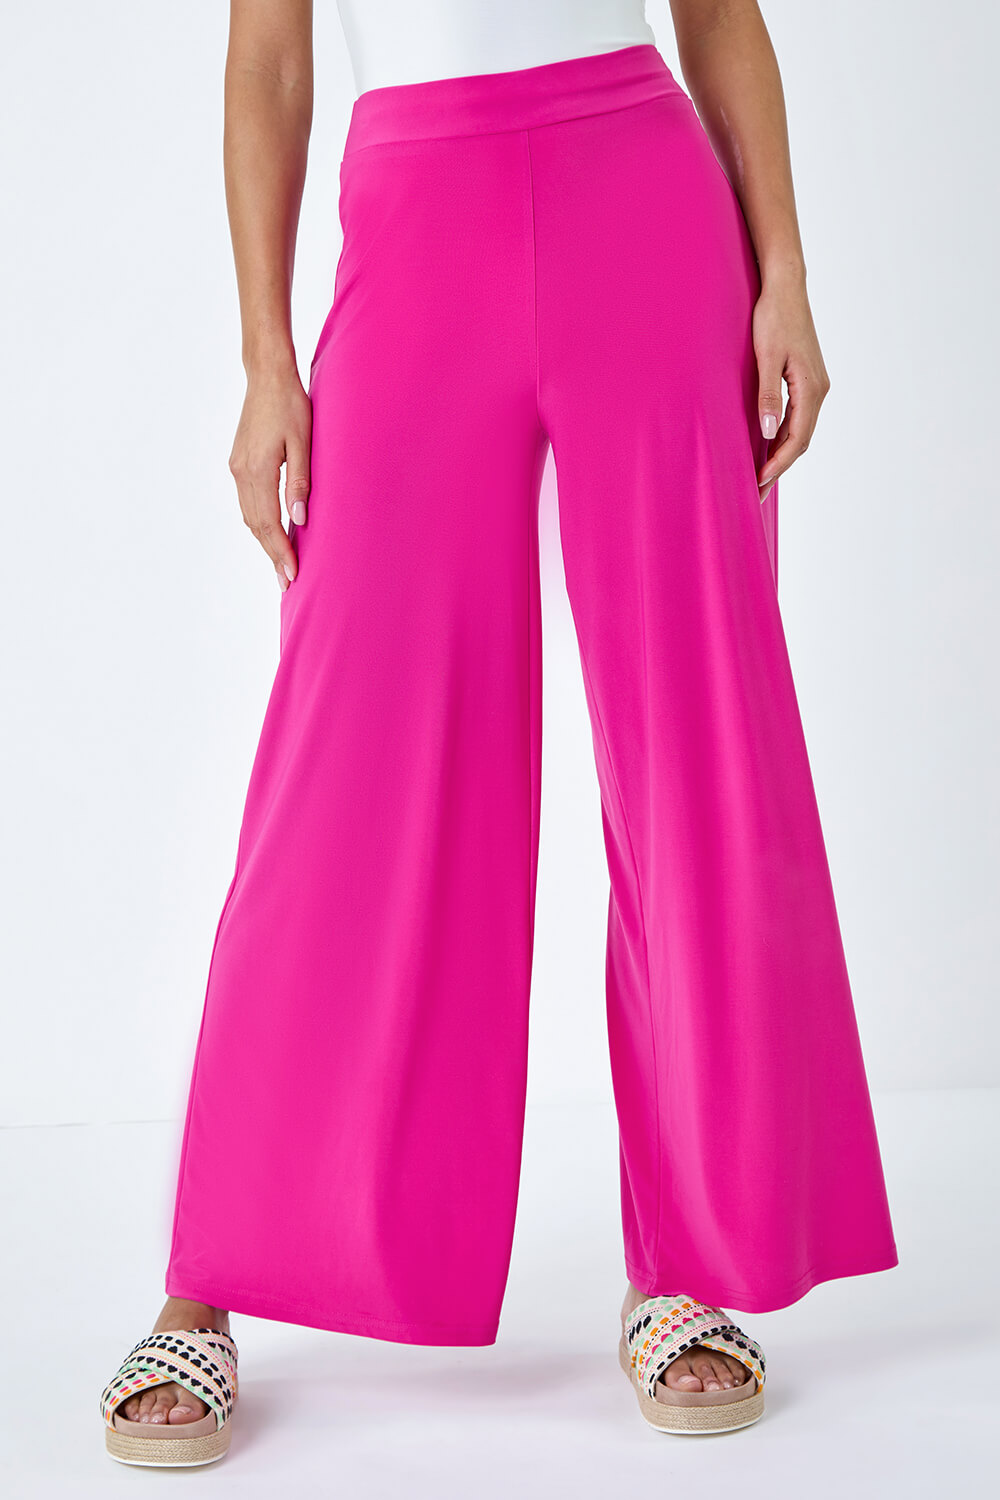 PINK Wide Leg Stretch Trousers, Image 4 of 5